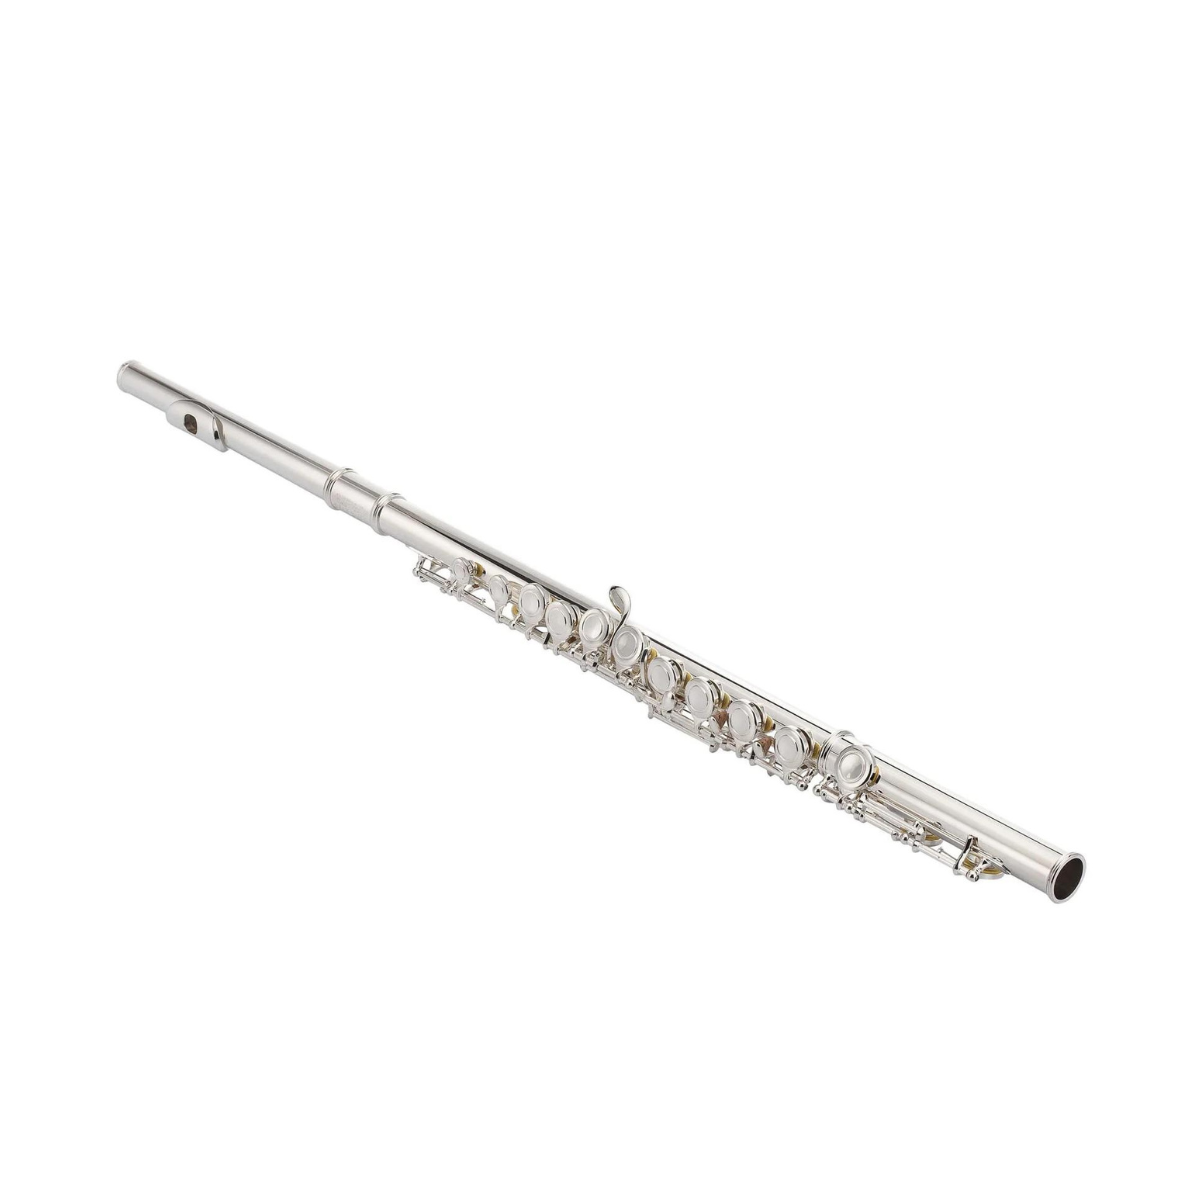 Ena Flute (for public examinations) Flute in C, can be equipped with a U-shaped mouthpiece for children